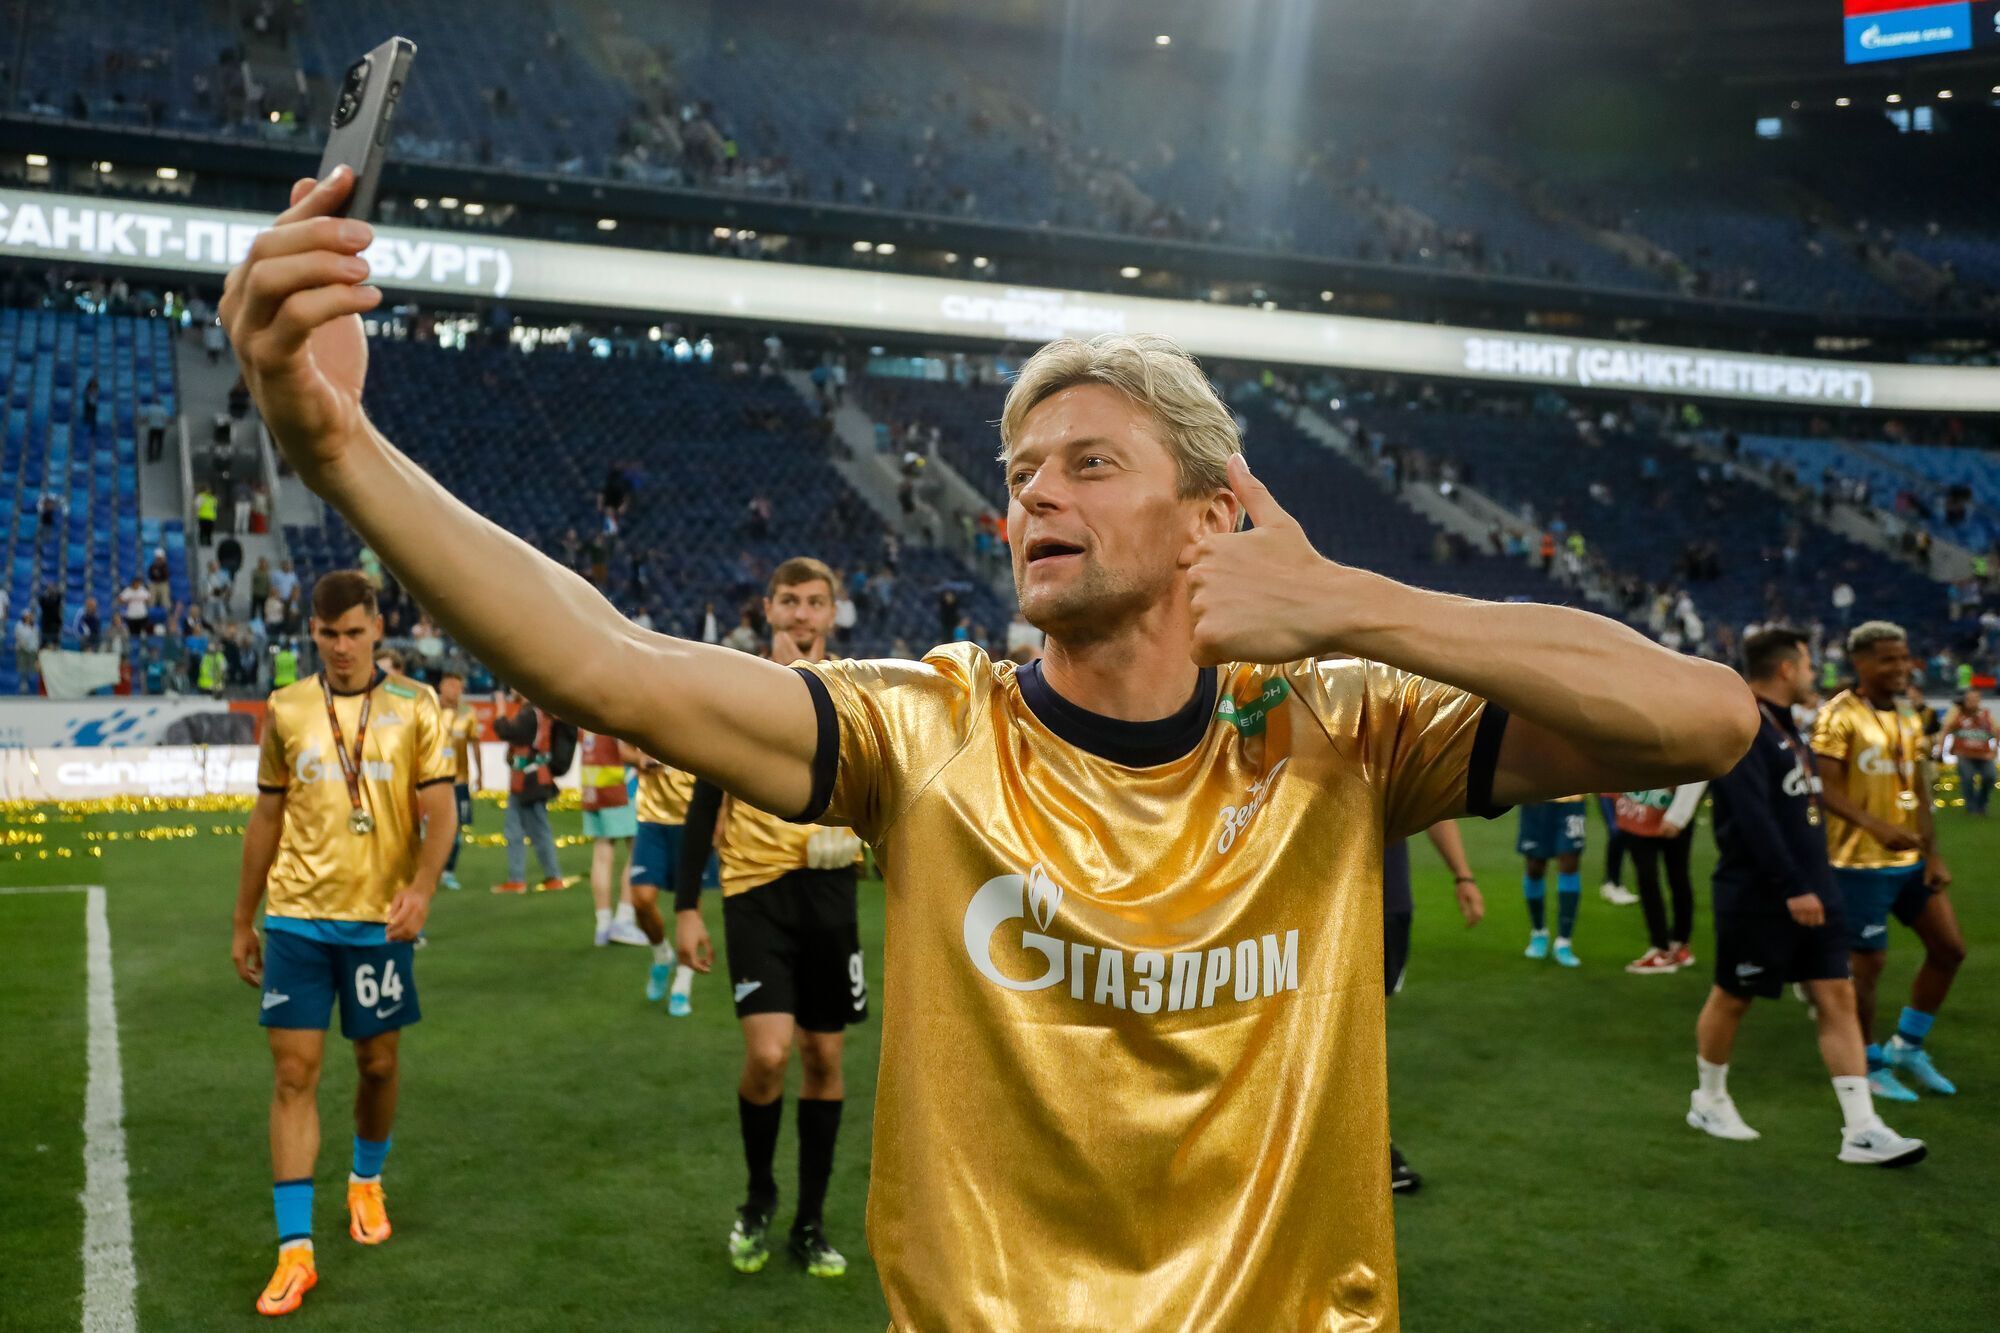 Zenit disgraced themselves in the Russian Cup by scoring on their own net in the 12th second of the match. Video.